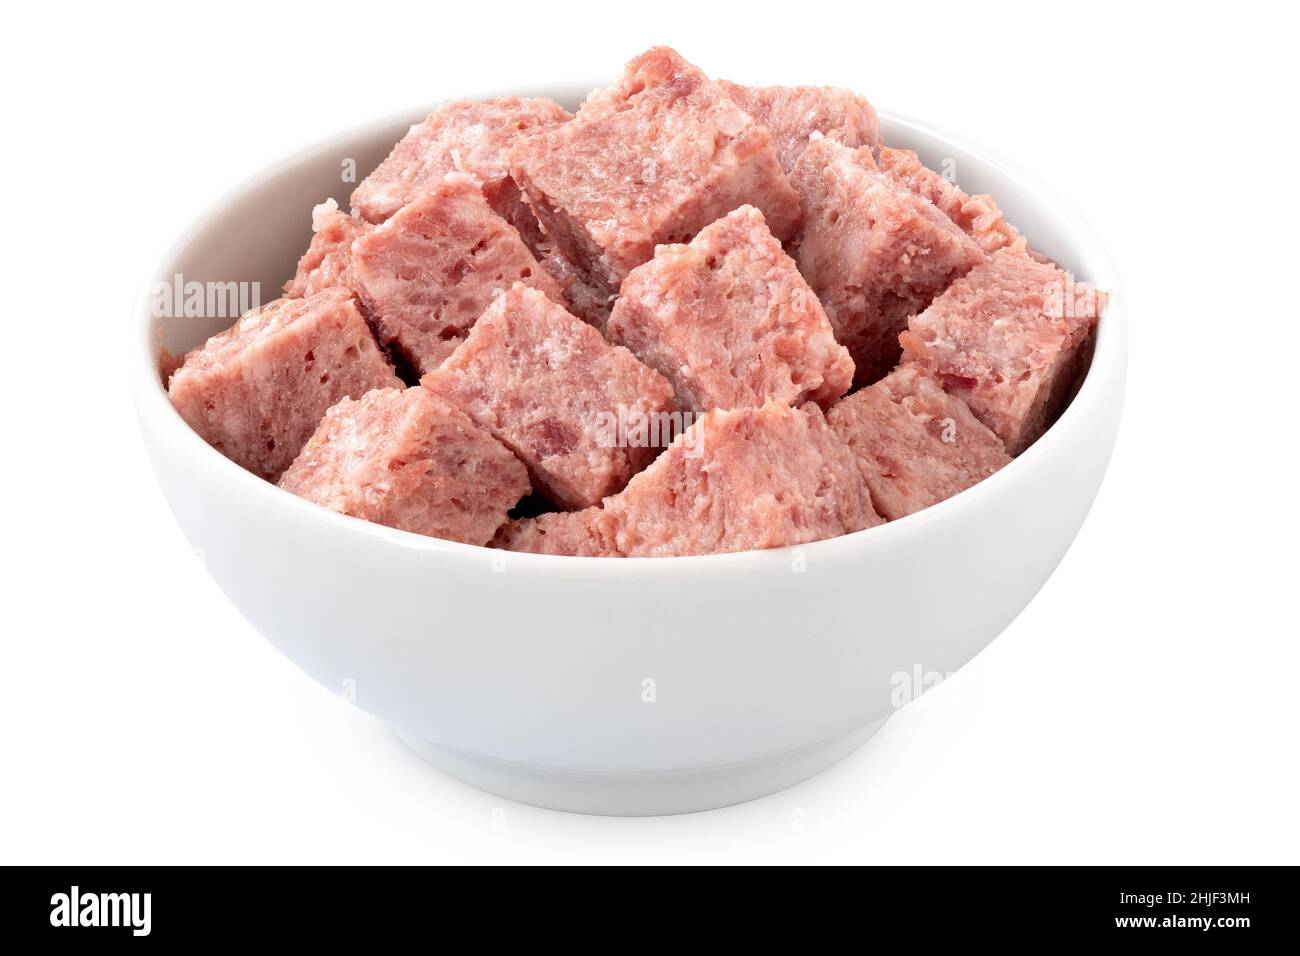 Diced pork luncheon meat in a white ceramic bowl isolated on white. Stock Photo